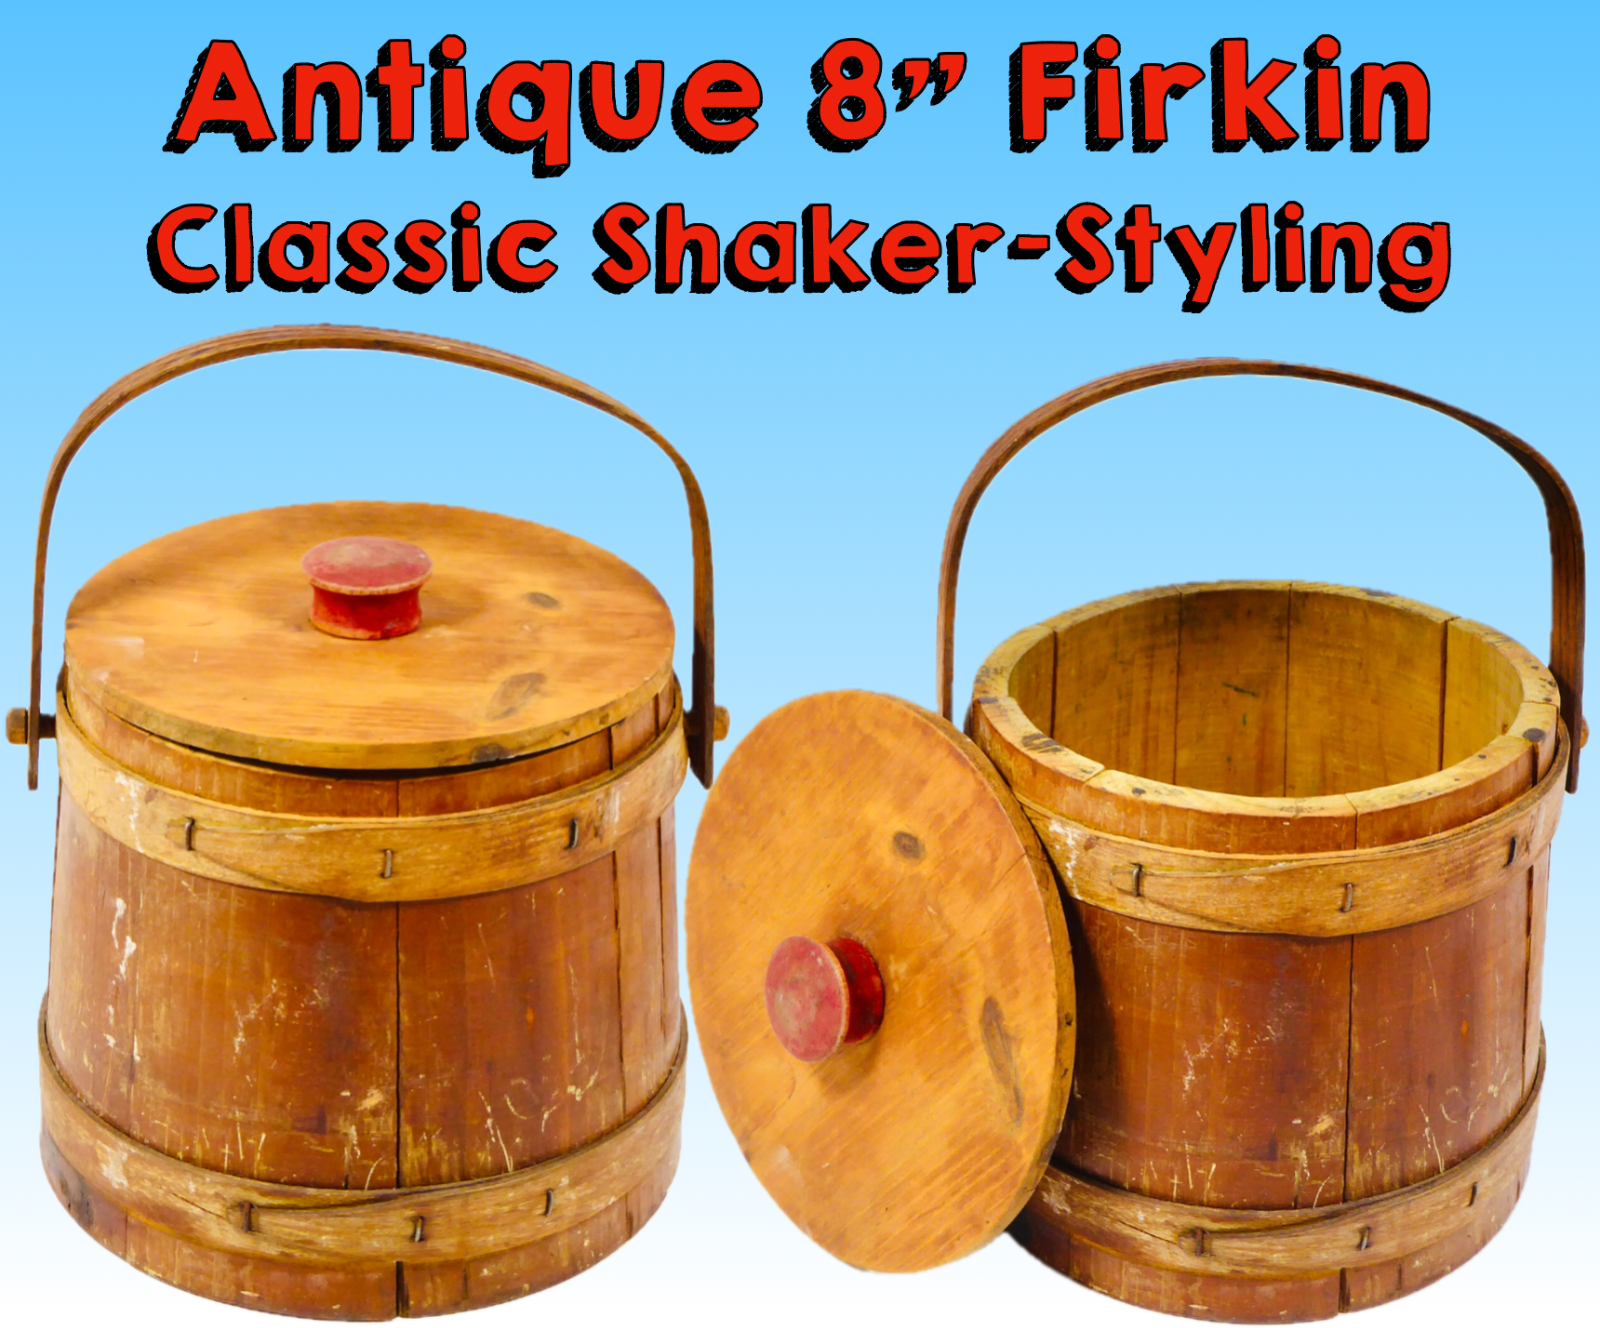 Primary image for 25% PRICE DROP: One Antique Firkin, 8" With Lid, Shaker Style Primitive Bucket